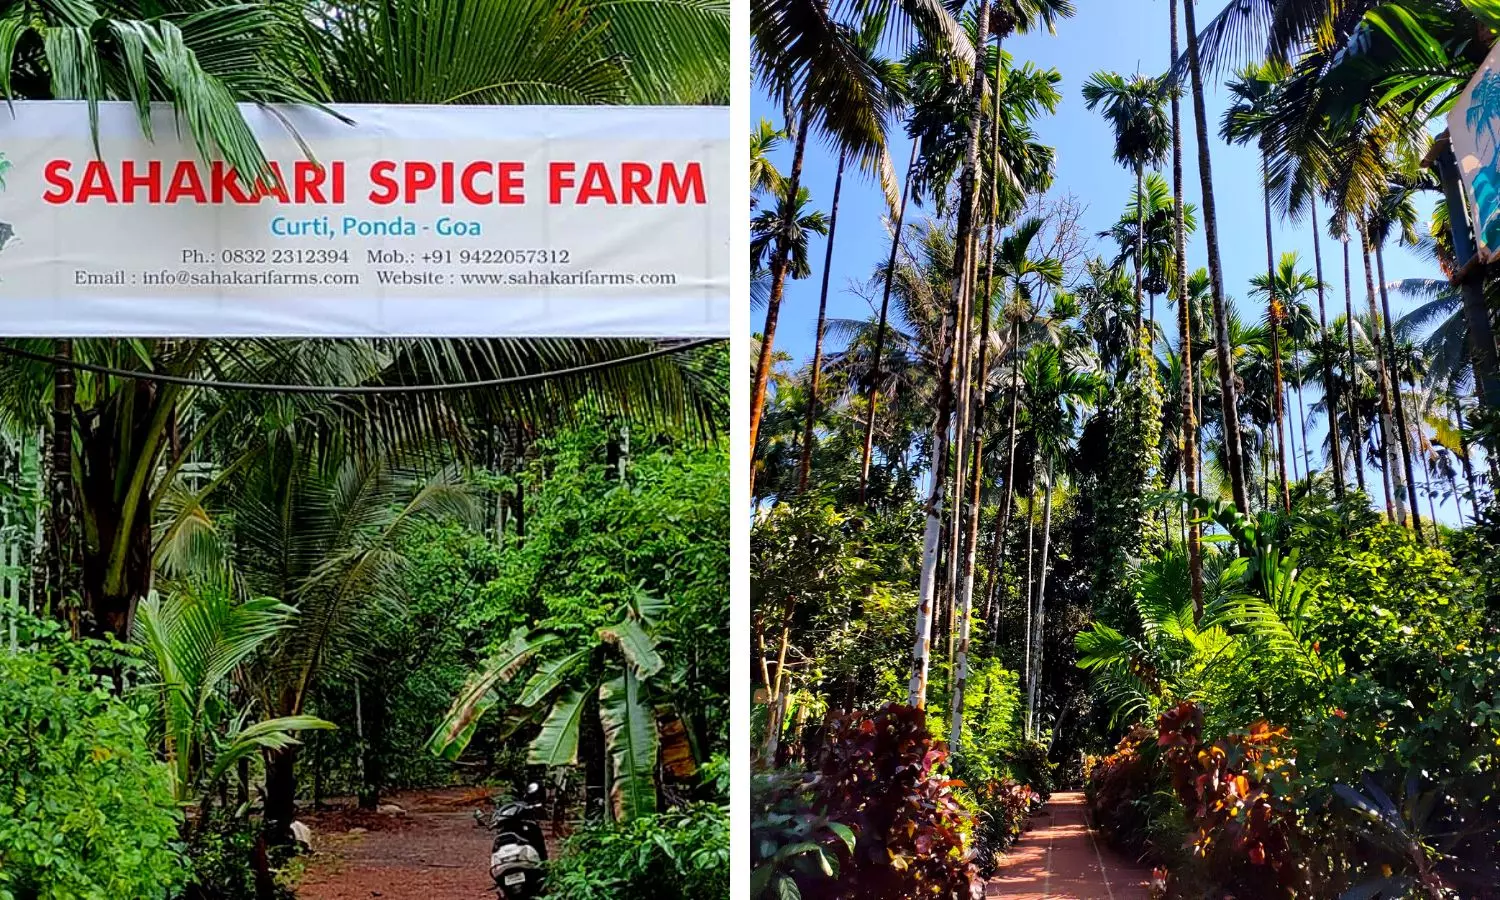 A trip down spice lane surrounded by a lush green forest